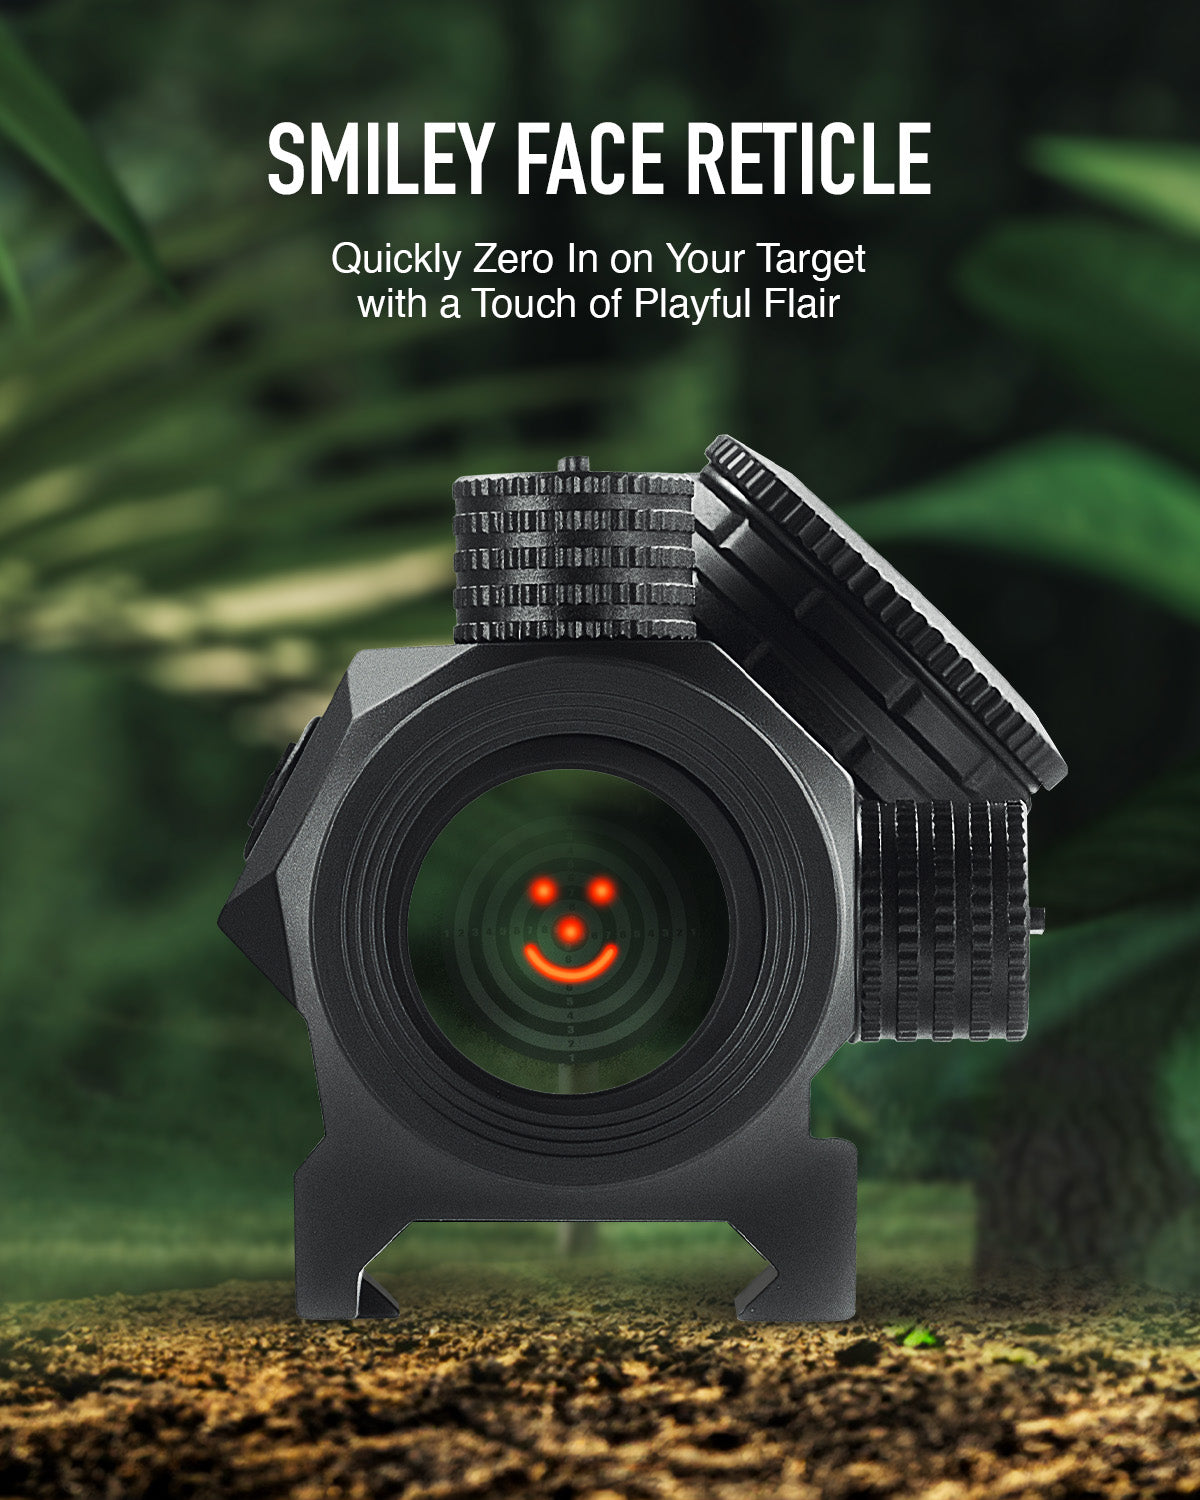 2MOA Red Dot Sight, Smiley Face Reticle